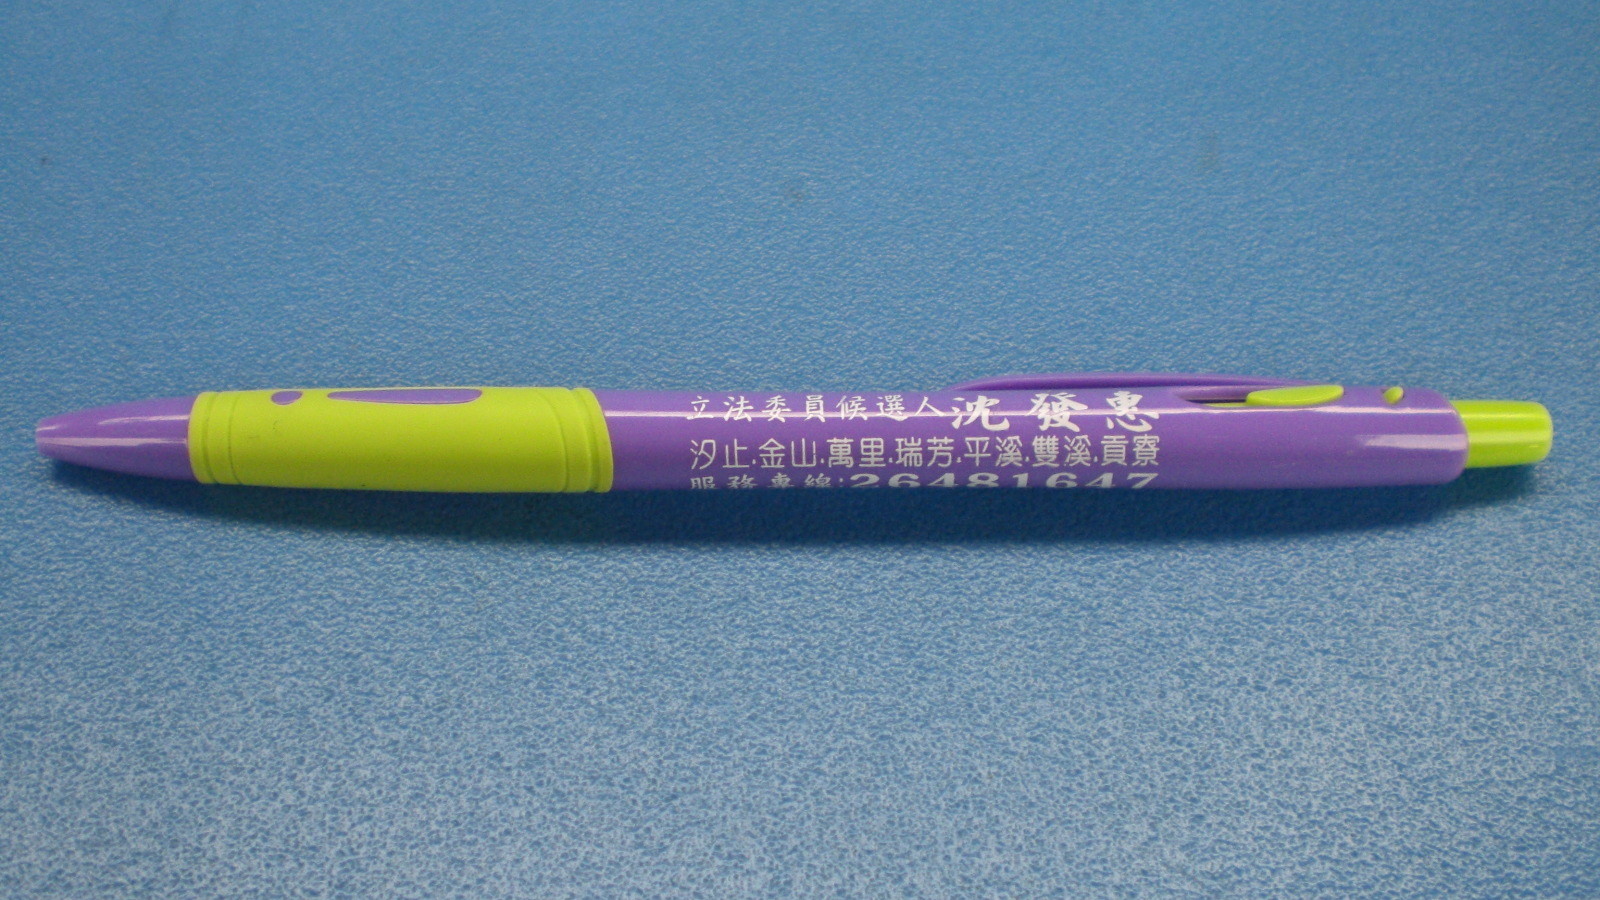 Ugly yellow-green and purple plastic ballpoint pen with white Chinese characters advertising an electoral candidate.